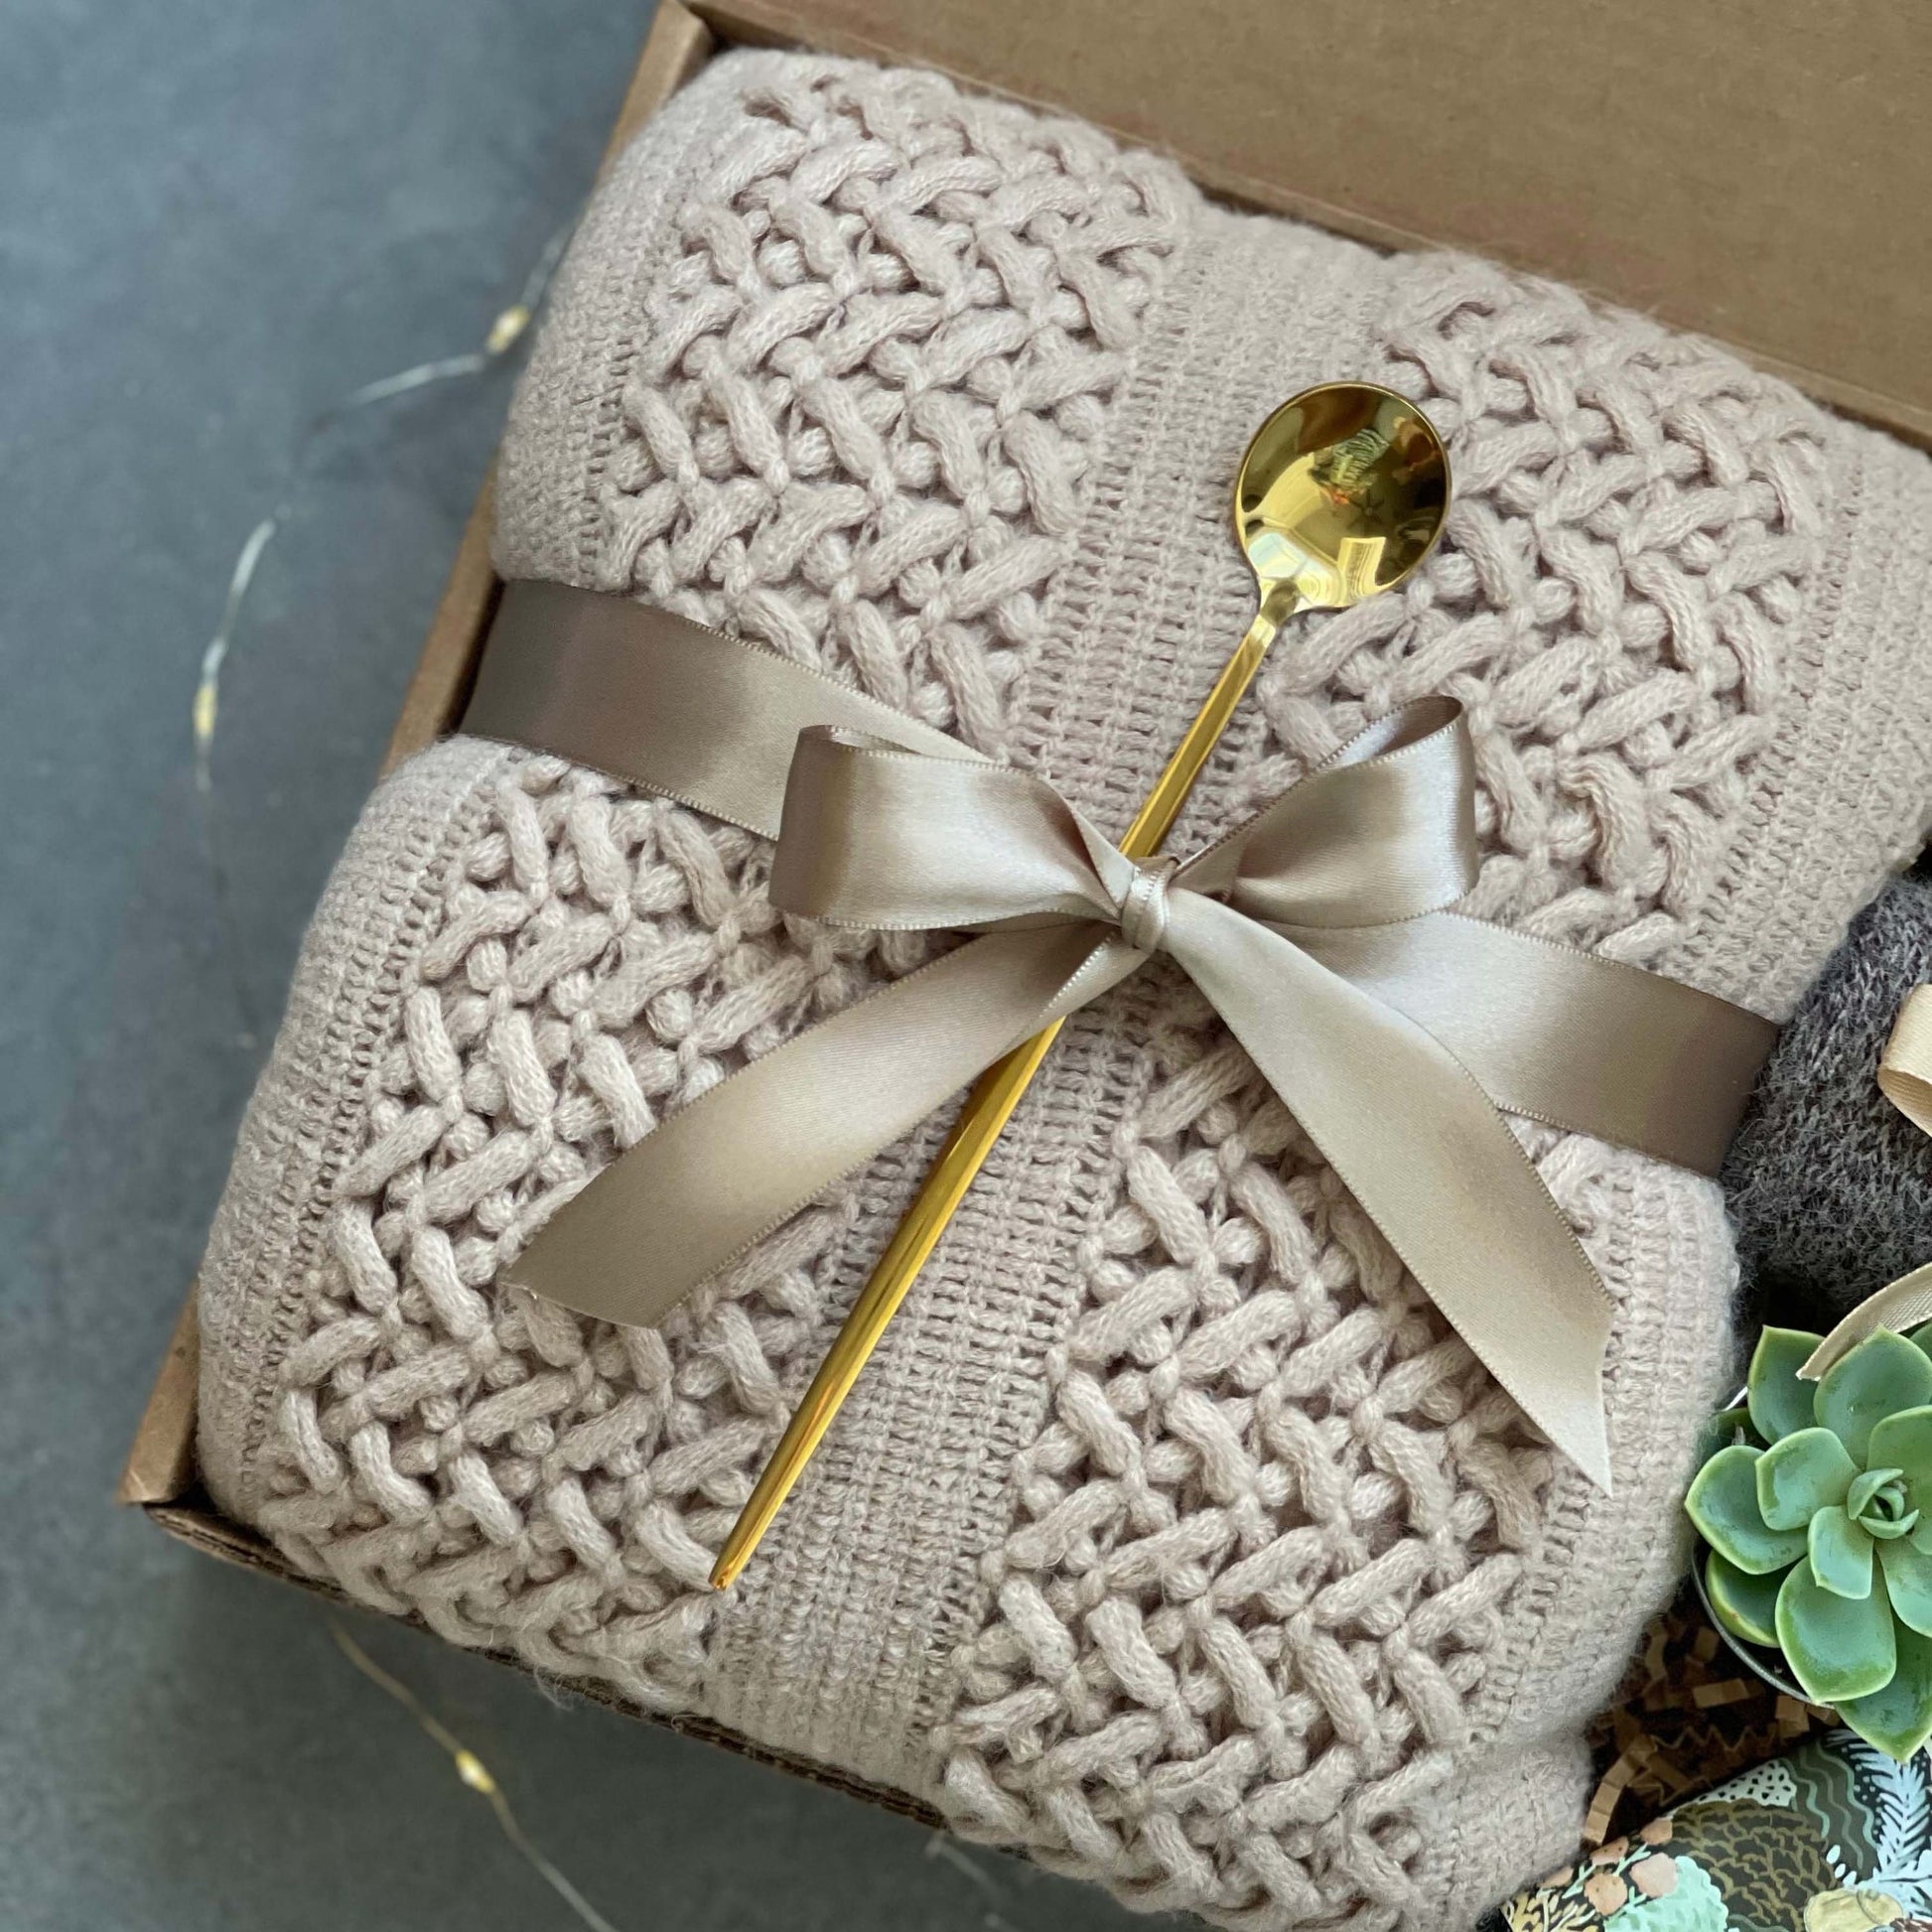 Birthday Gifts for Her Hygge Gift Basket With Blanket, Succulent